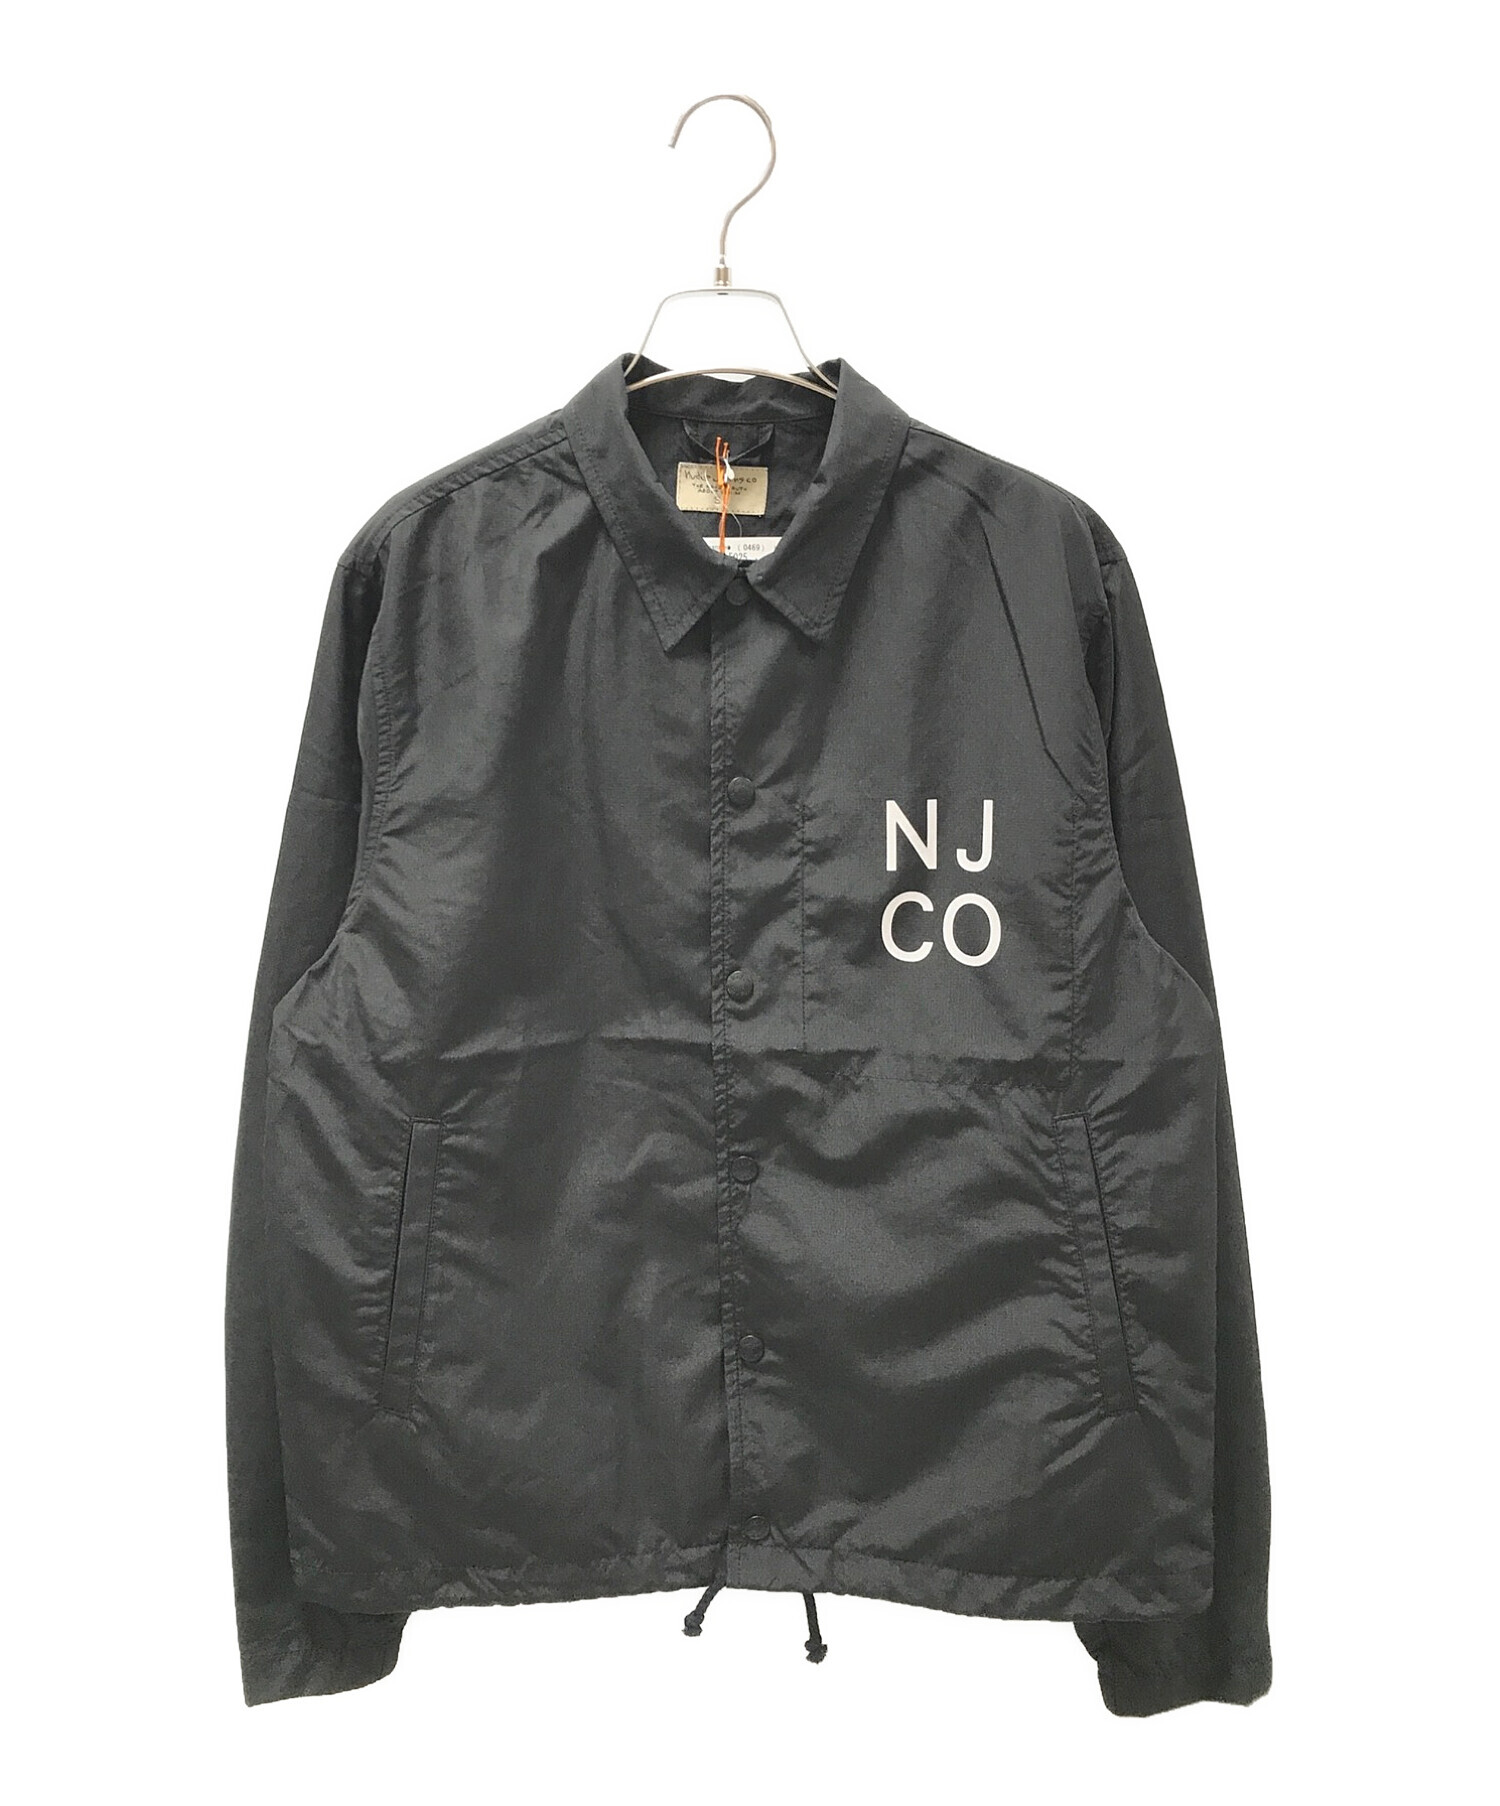 Nudie Jeans coヌーディージーンズ COACH JACKET-